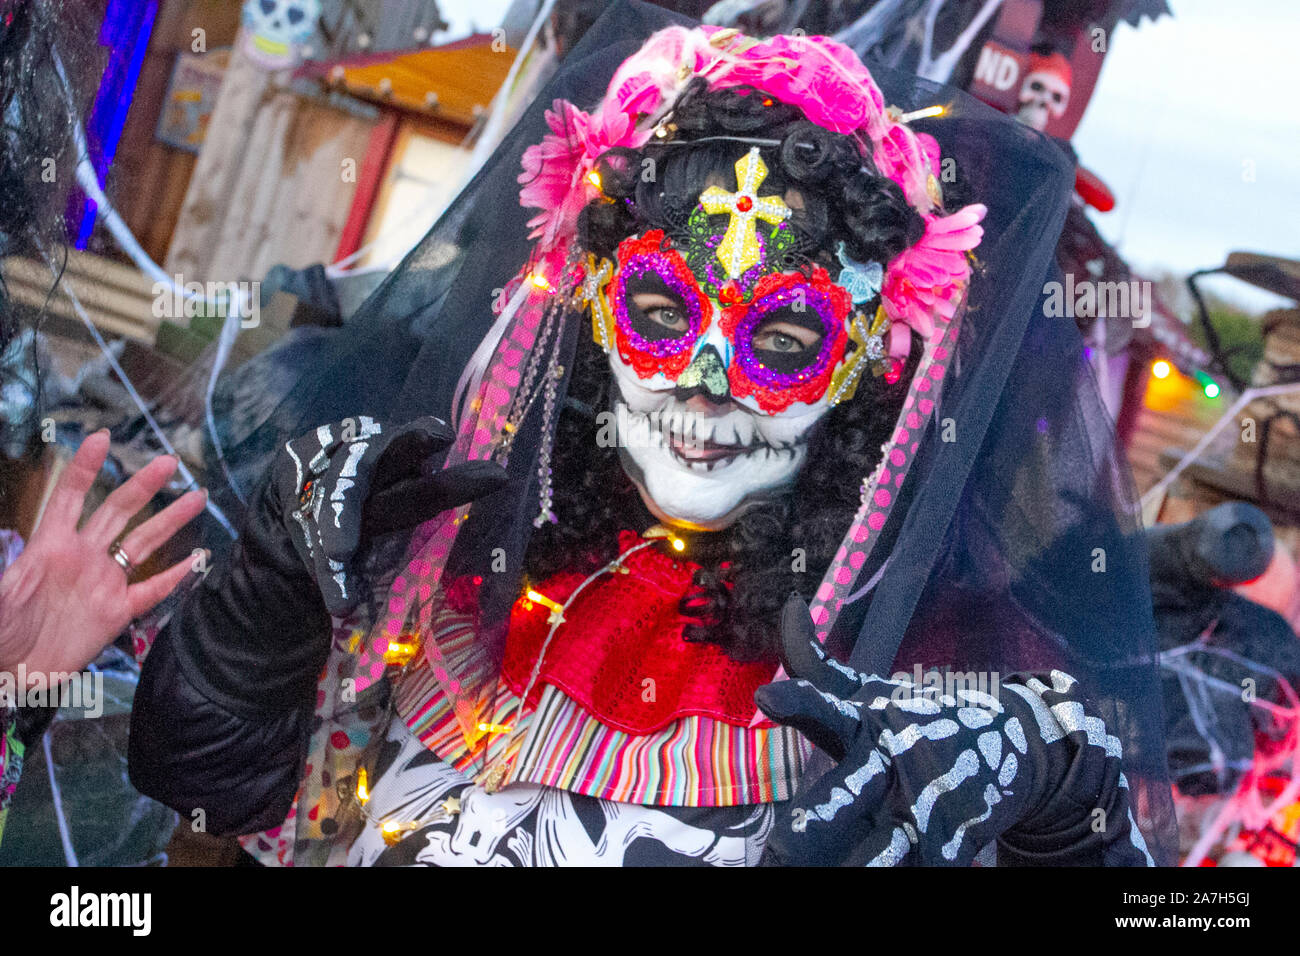 Southport, Merseyside. UK Weather. 2nd Nov, 2019. Day Of The Dead' Festival – November is the host month to Mexico's Day of the Dead – and Southport Pleasureland staged its own twist on the Mexican celebration with explosive colour and vibrant revelry in a feast for the senses.  A host of fantastic entertainment including stilt walkers, flame eaters, music, dancers.  Credit; MediaWorldImages/AlamyLiveNews Stock Photo